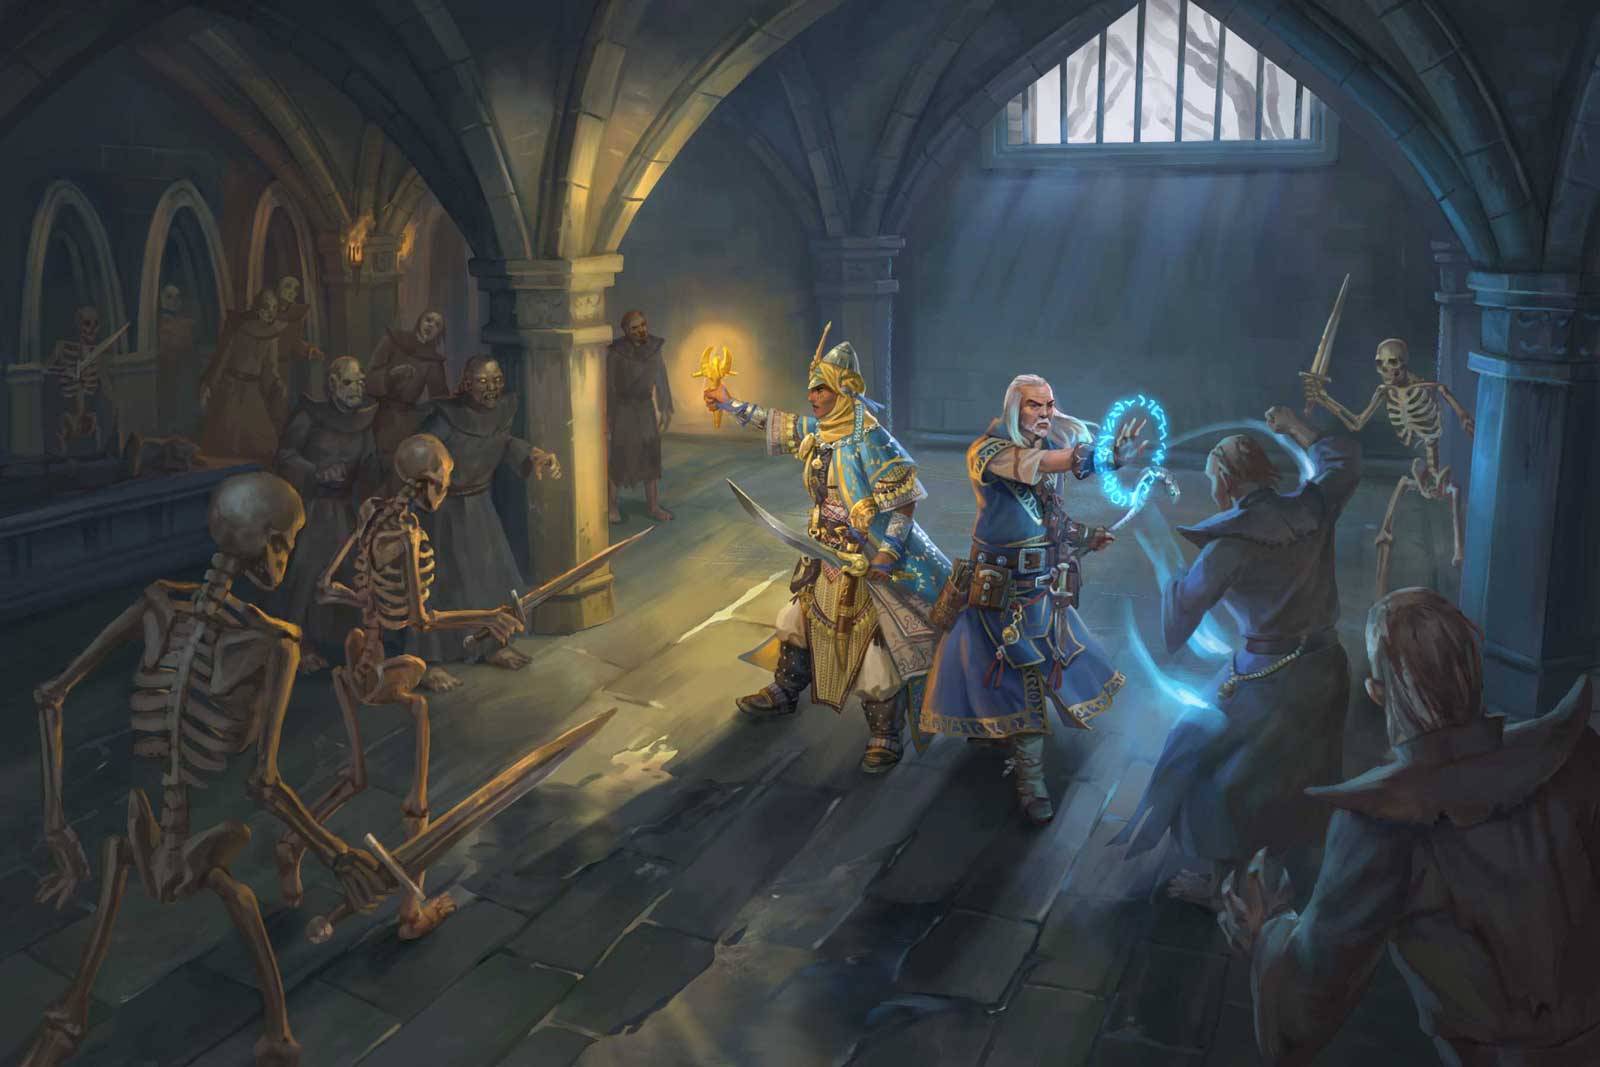 Pathfinder Iconics, Kyra the cleric and Ezren the wizard battle a hoard of undead and skeletons in a dungeon lit by torches and a high window